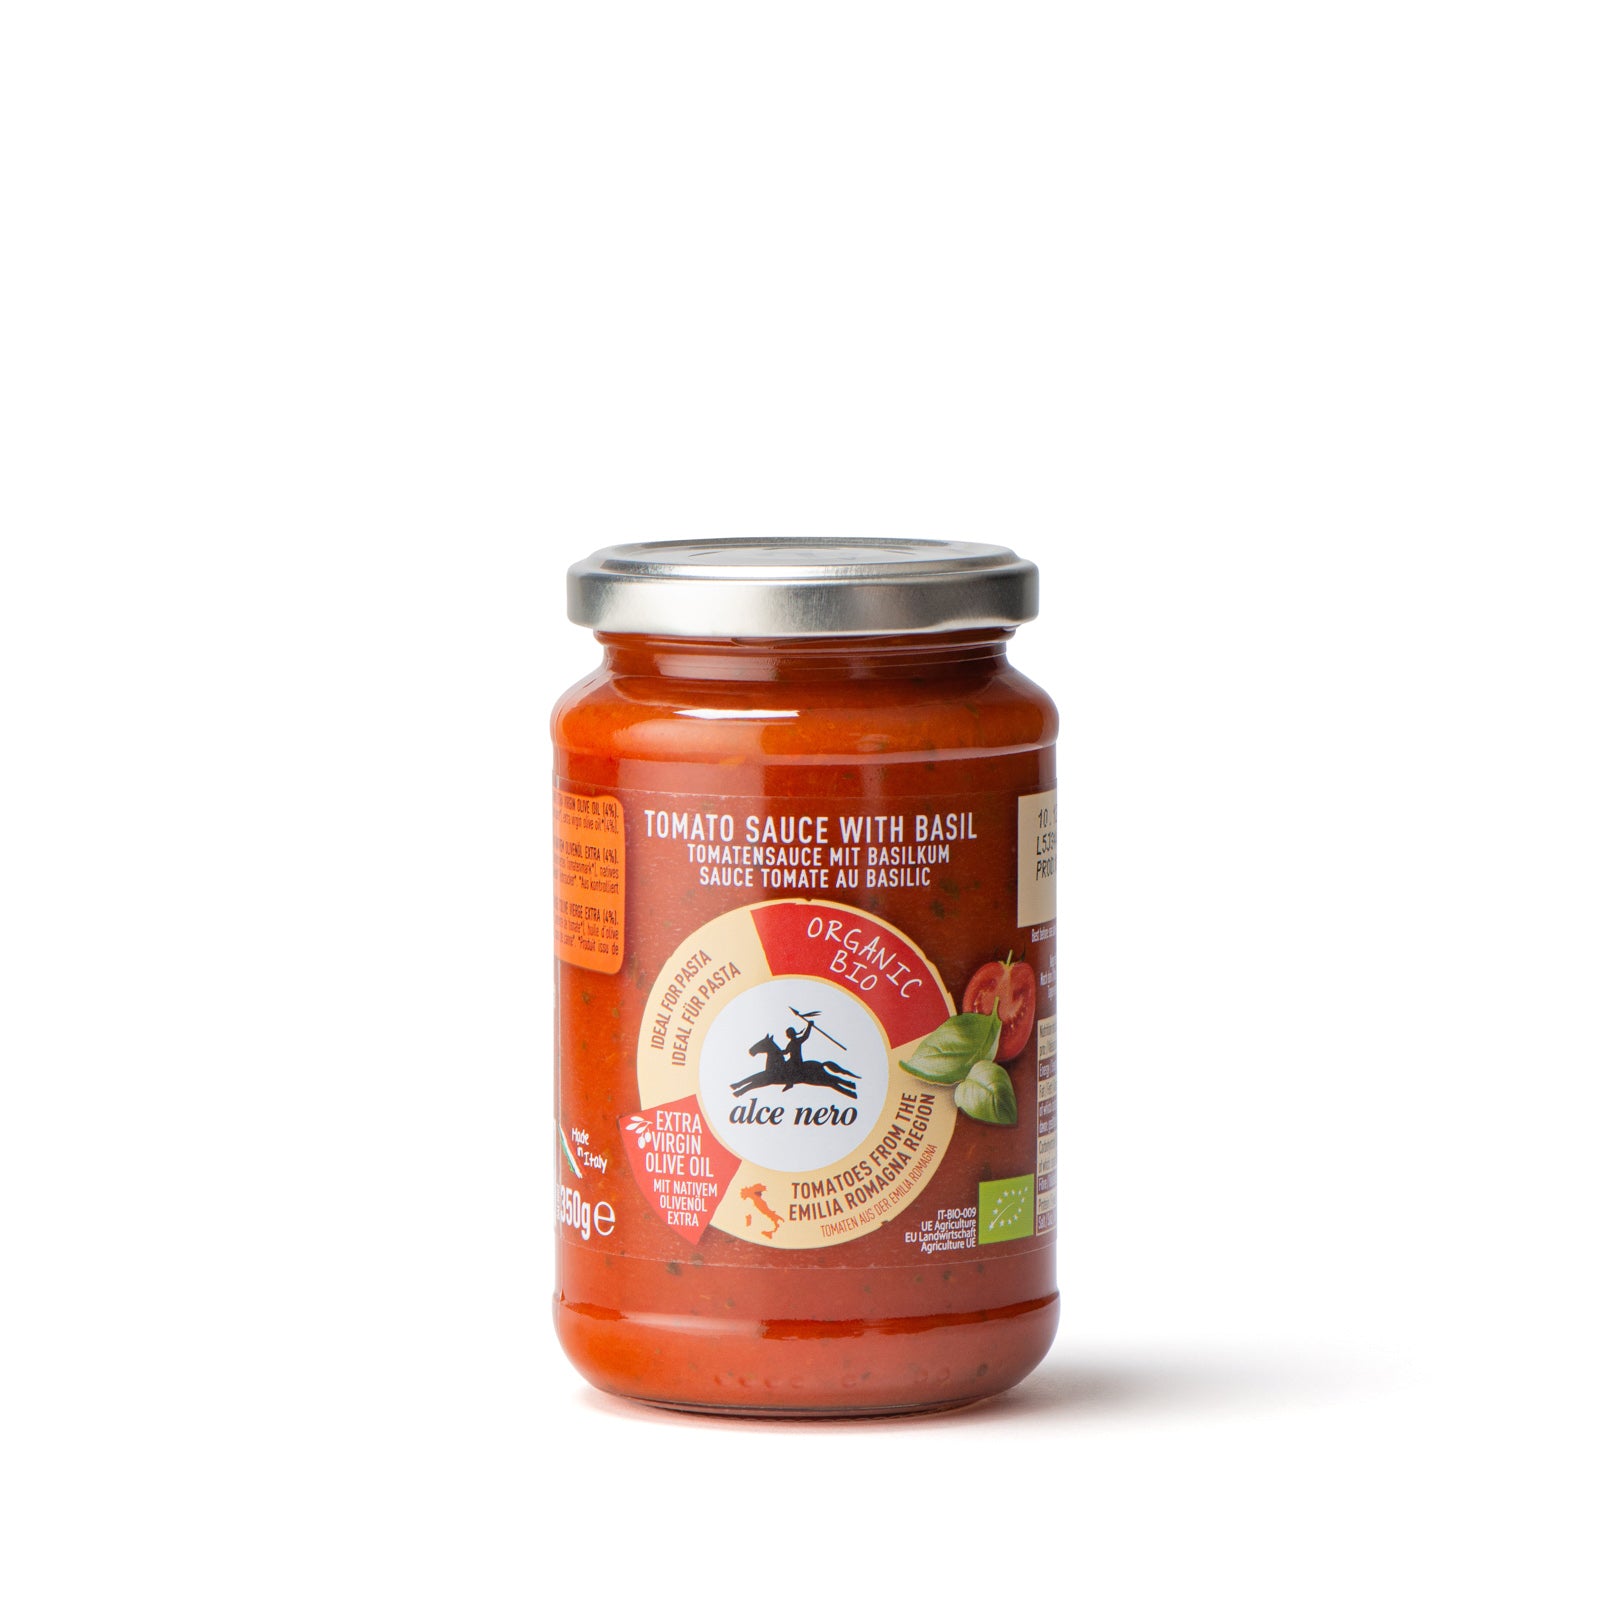 Organic Tomato Sauce with basil - PO845IN